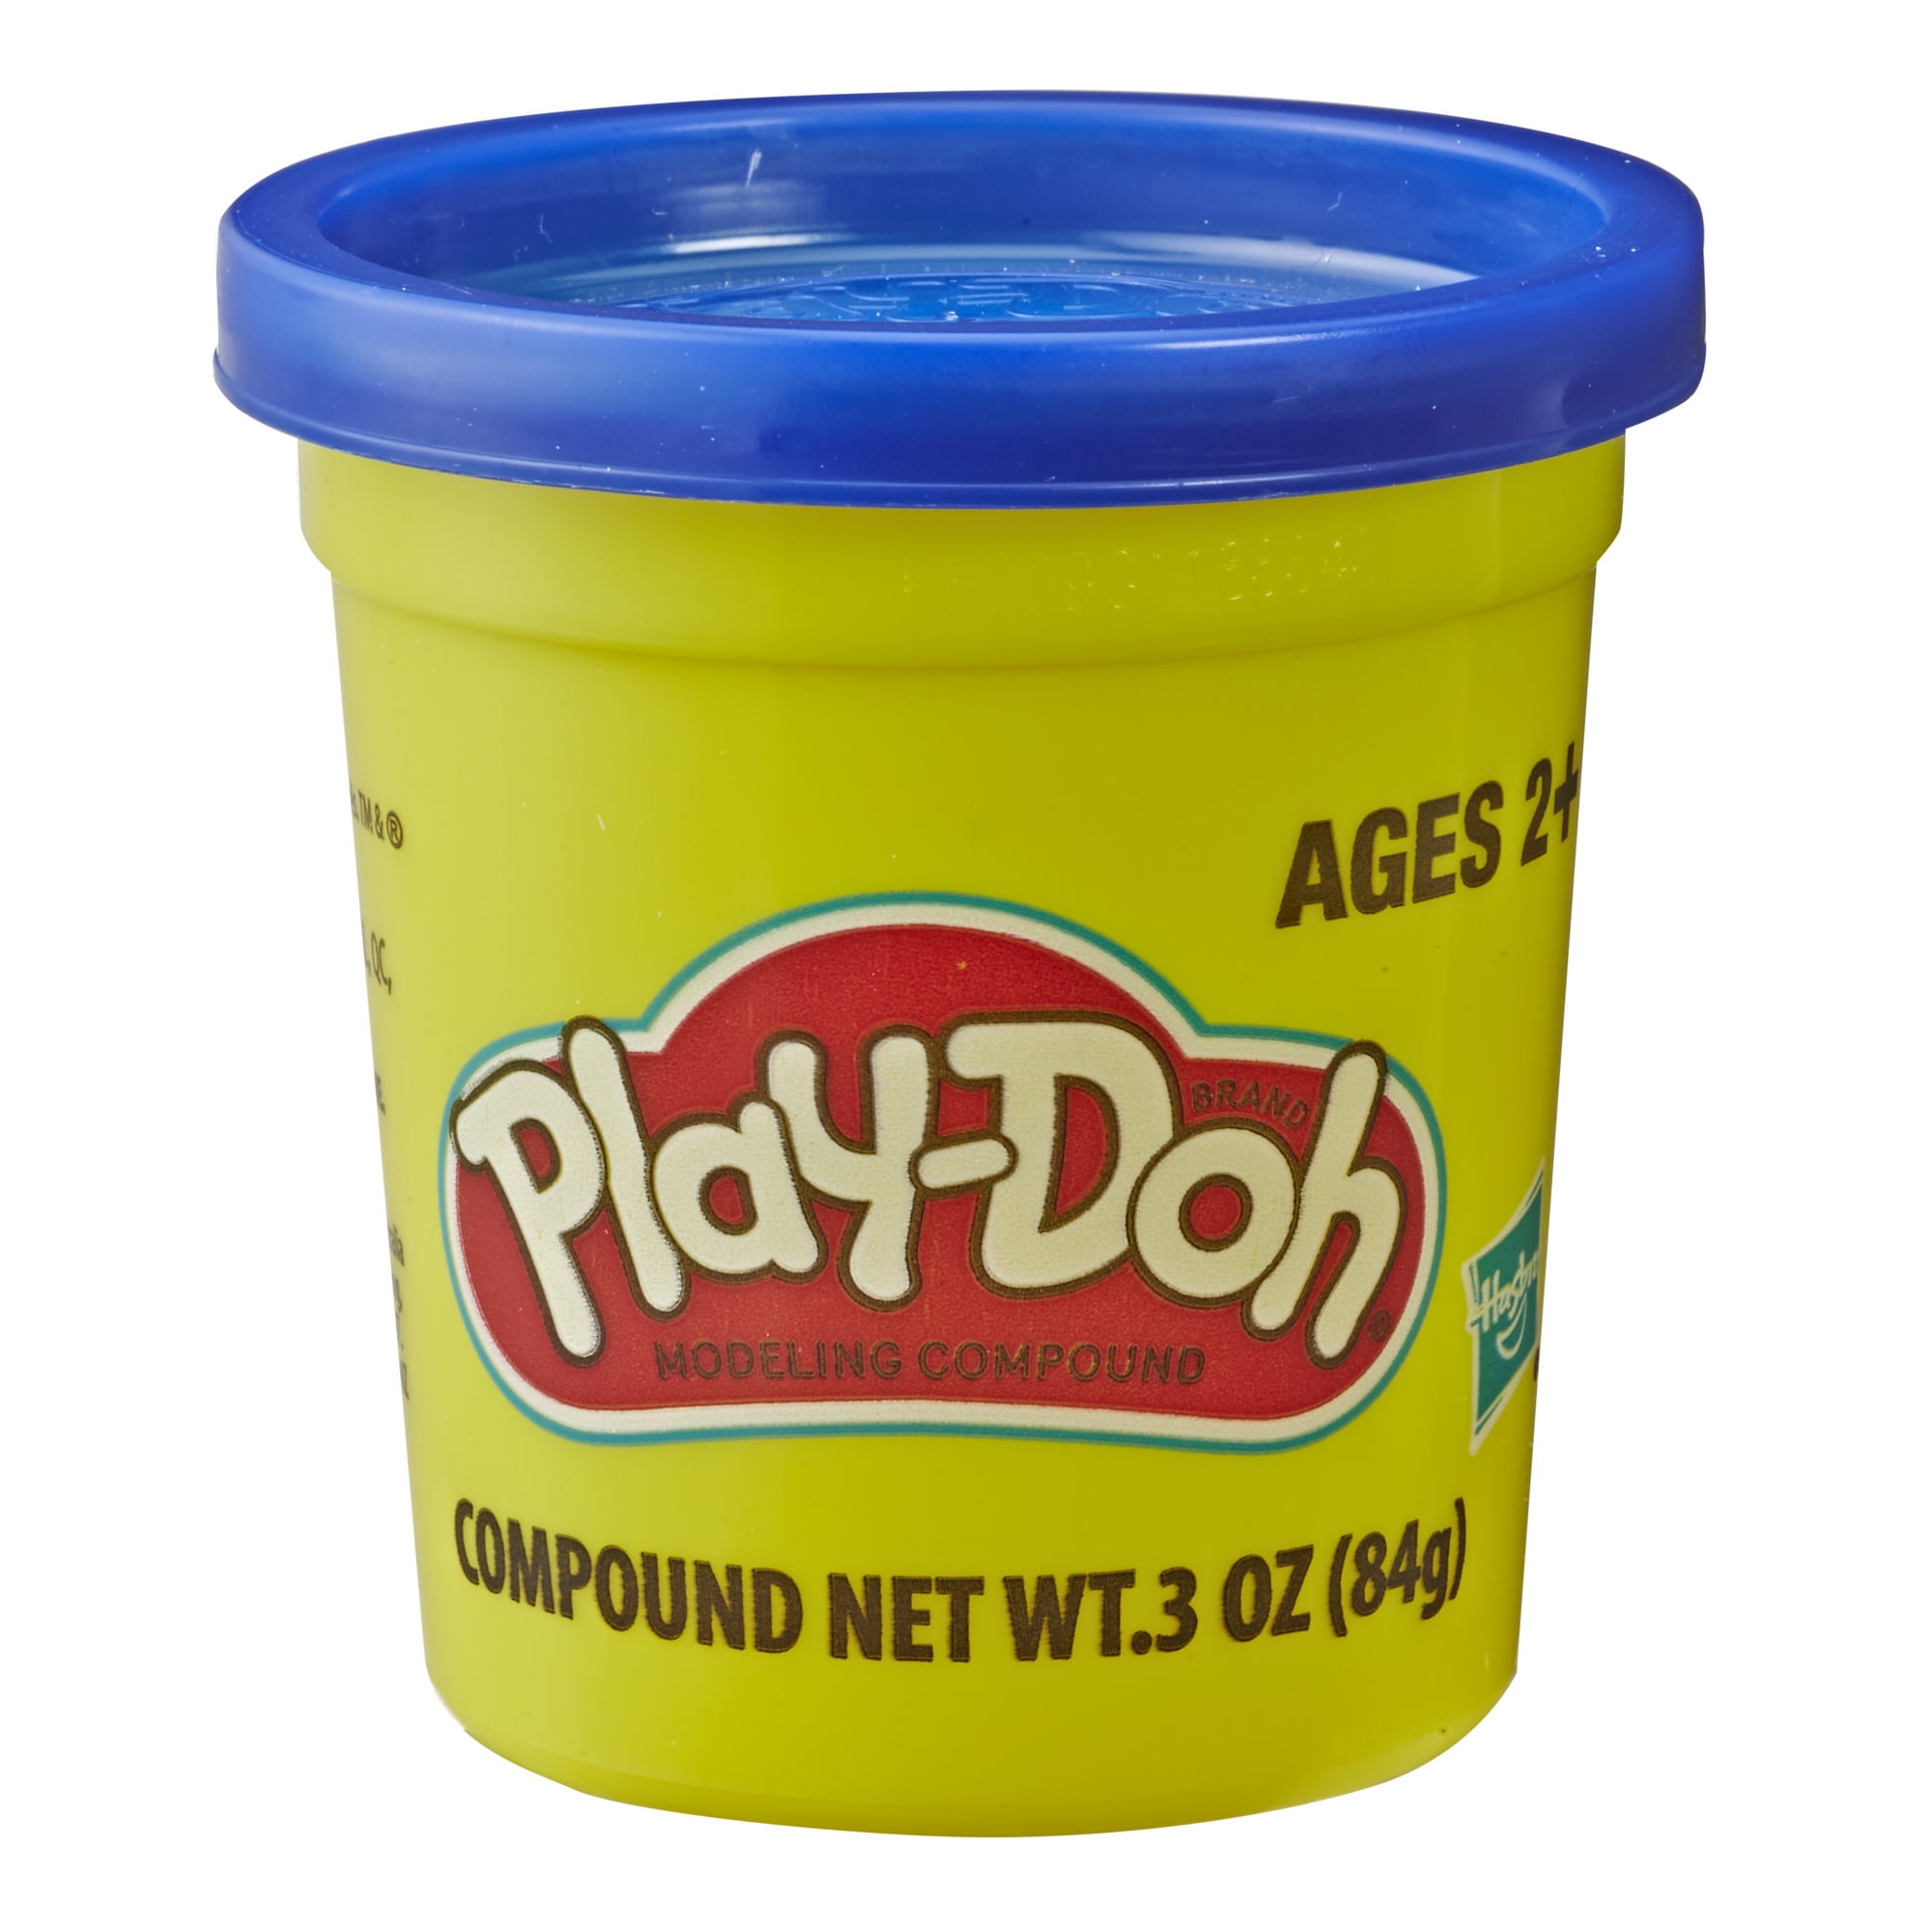 Play-Doh Brand Modeling Compound 